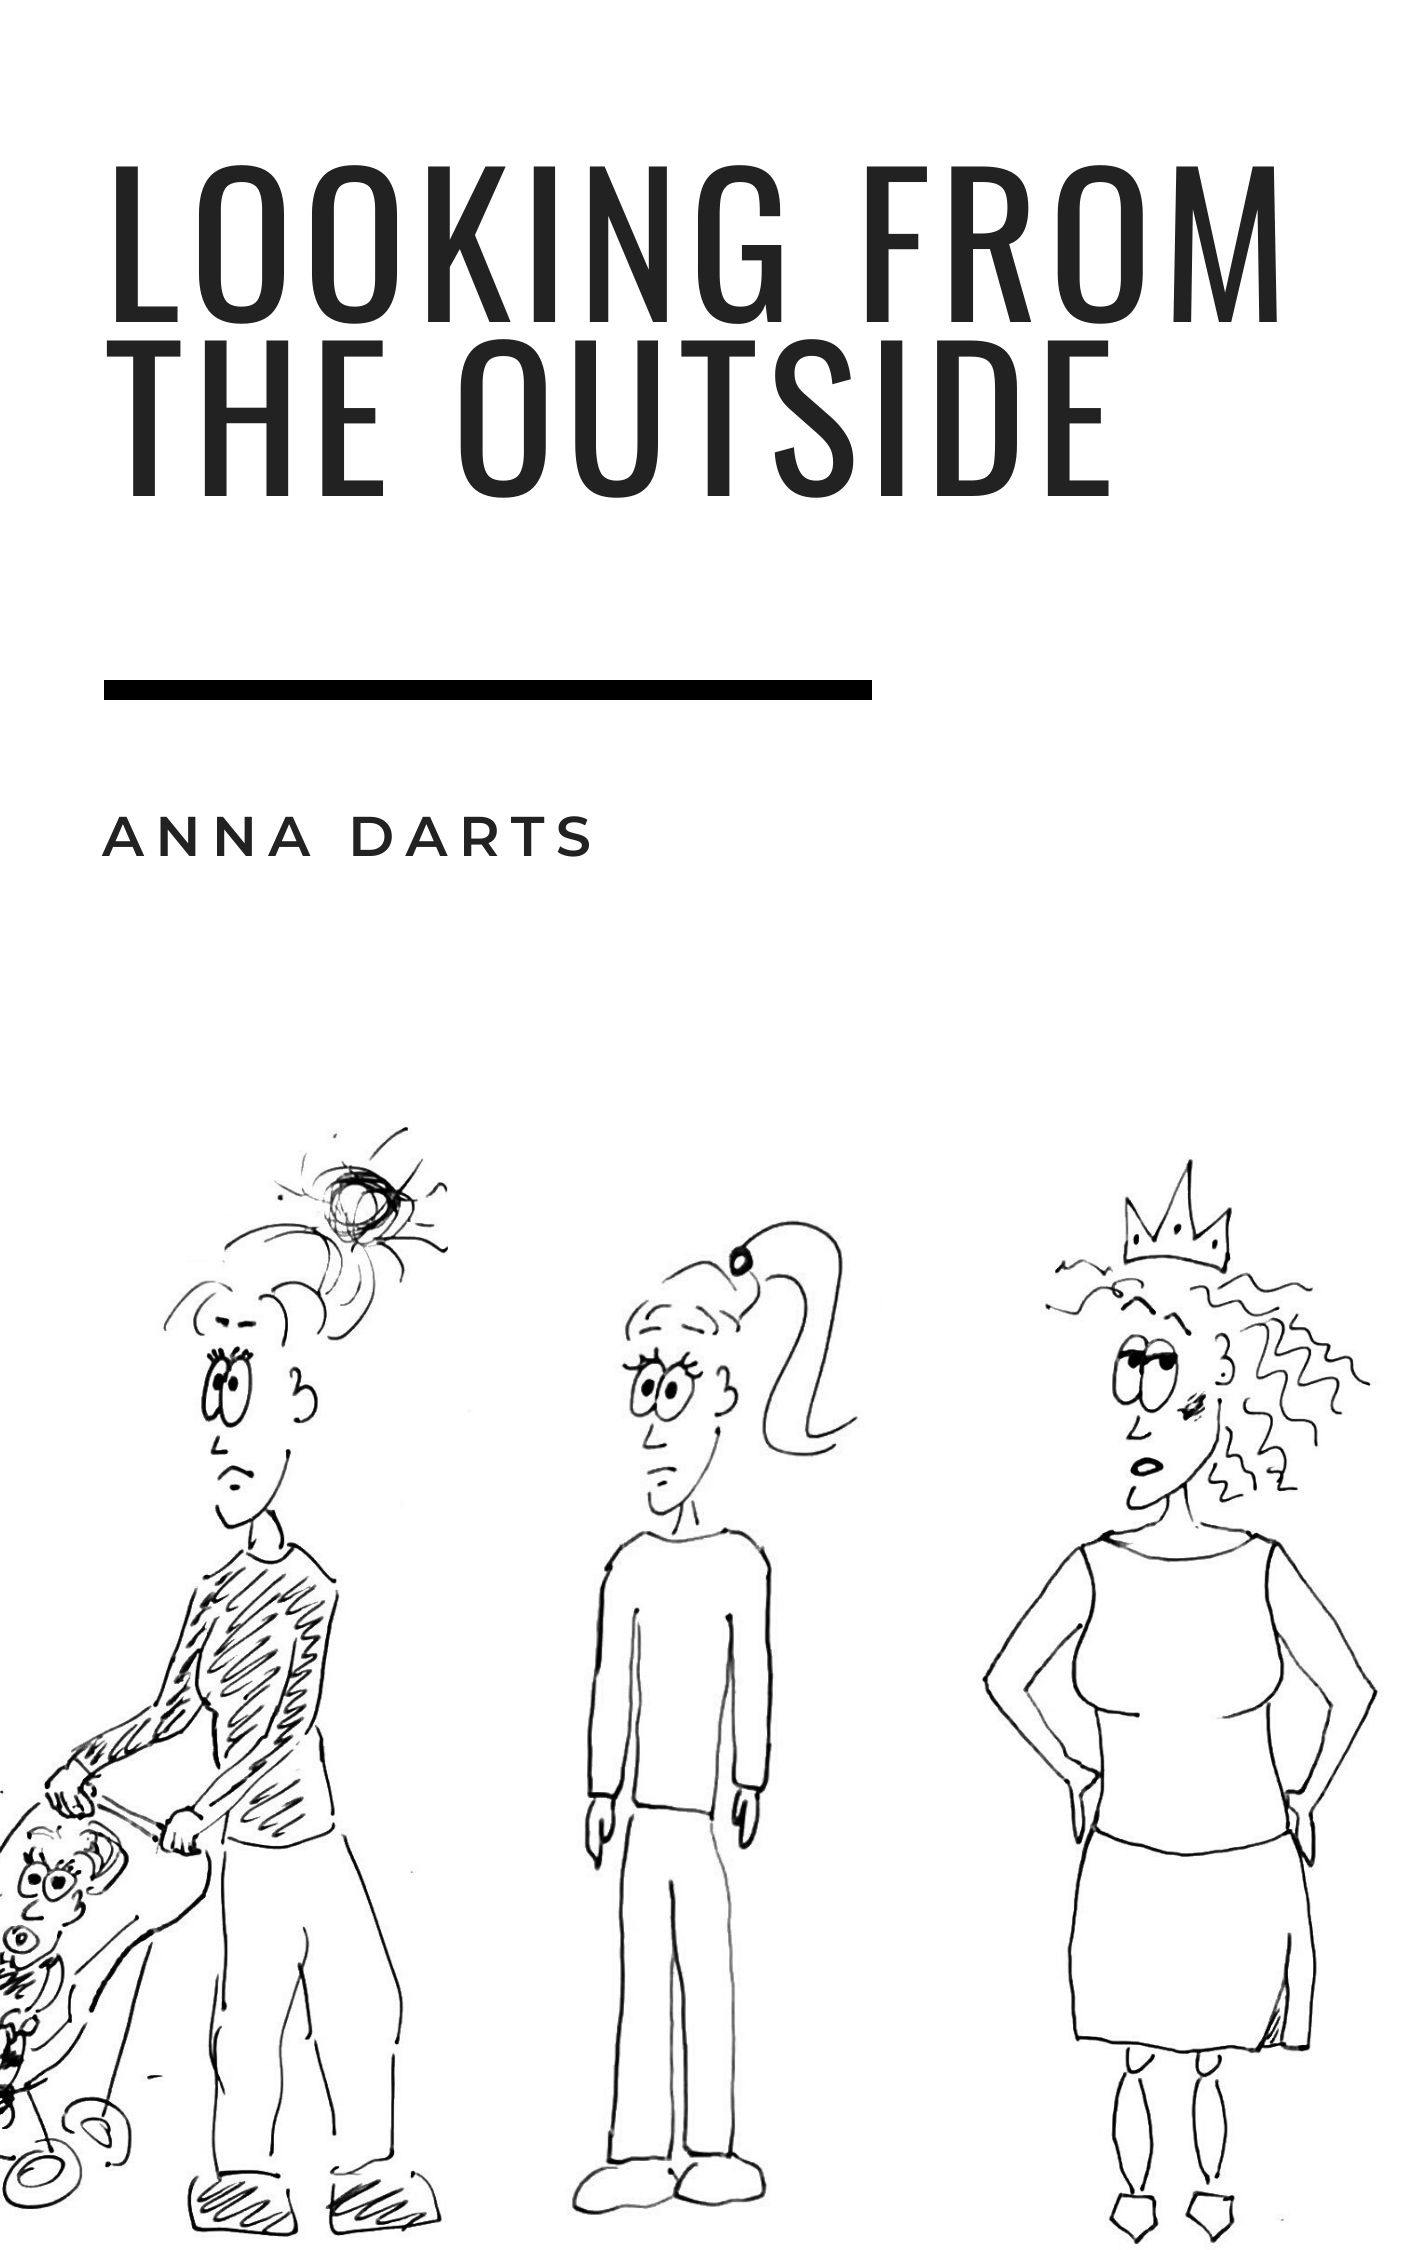 Looking from the outside - Anna Darts